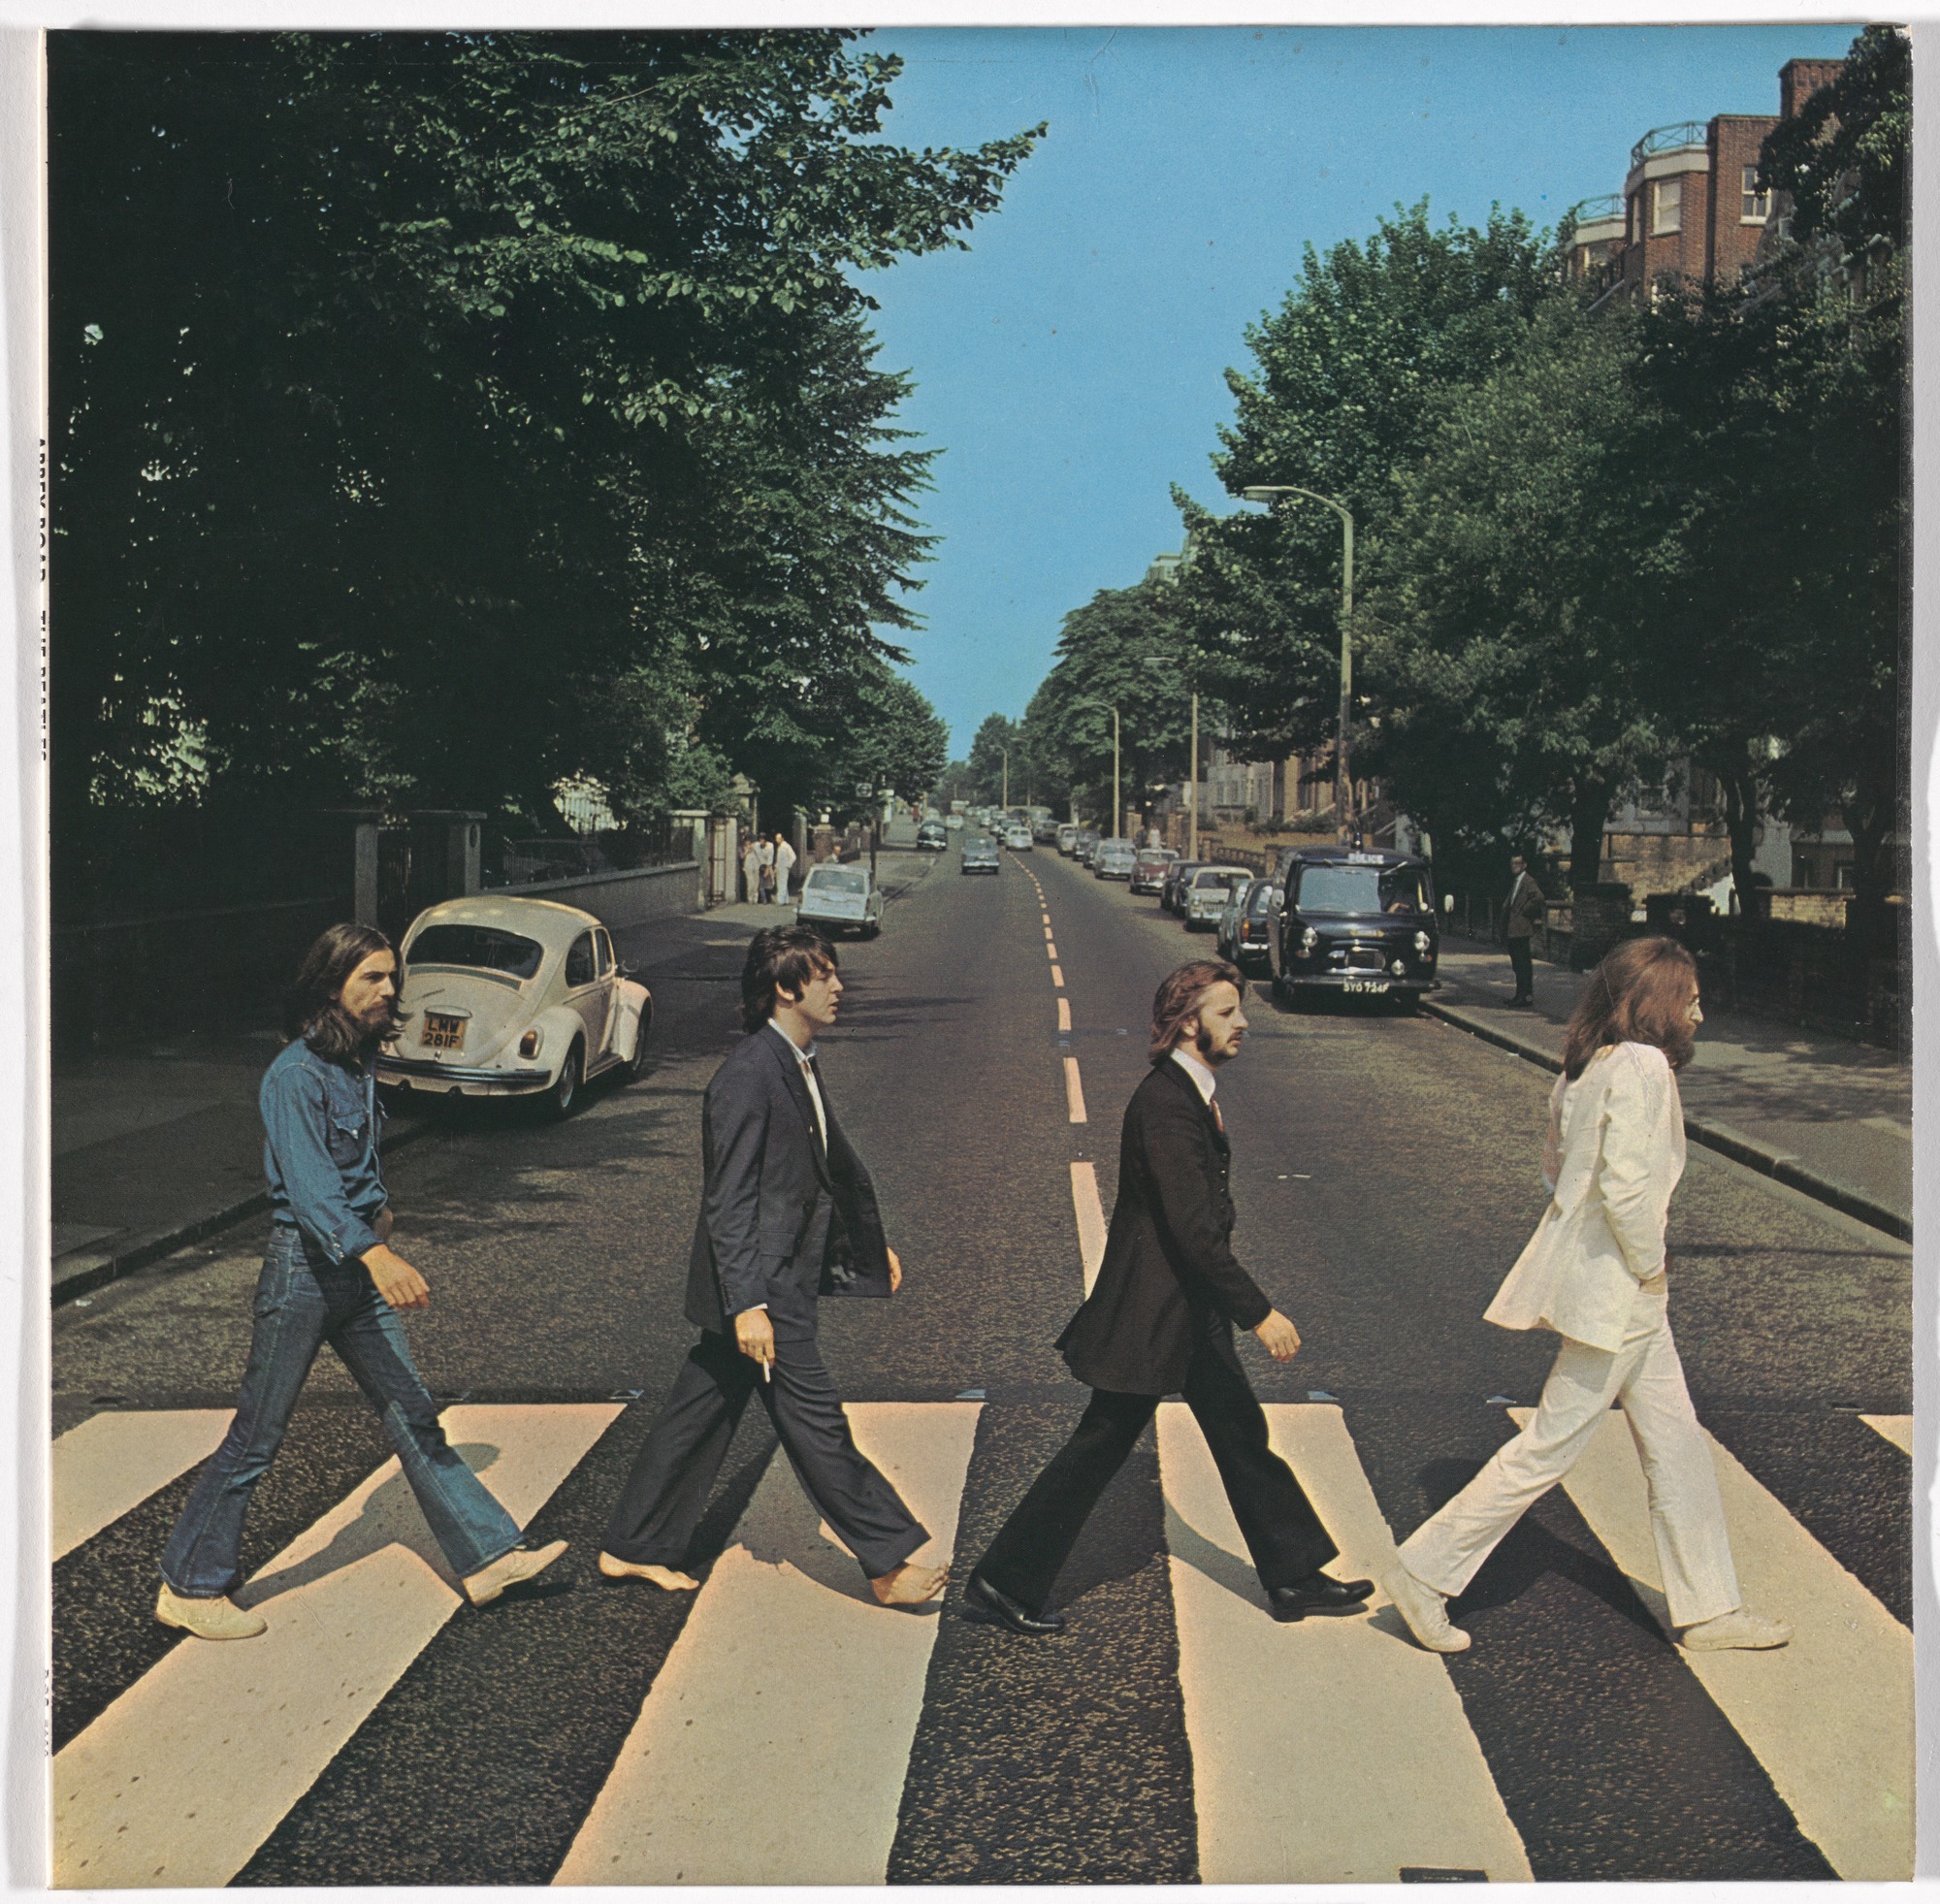 The Beatles - Abbey Road (Full Cover Album) 